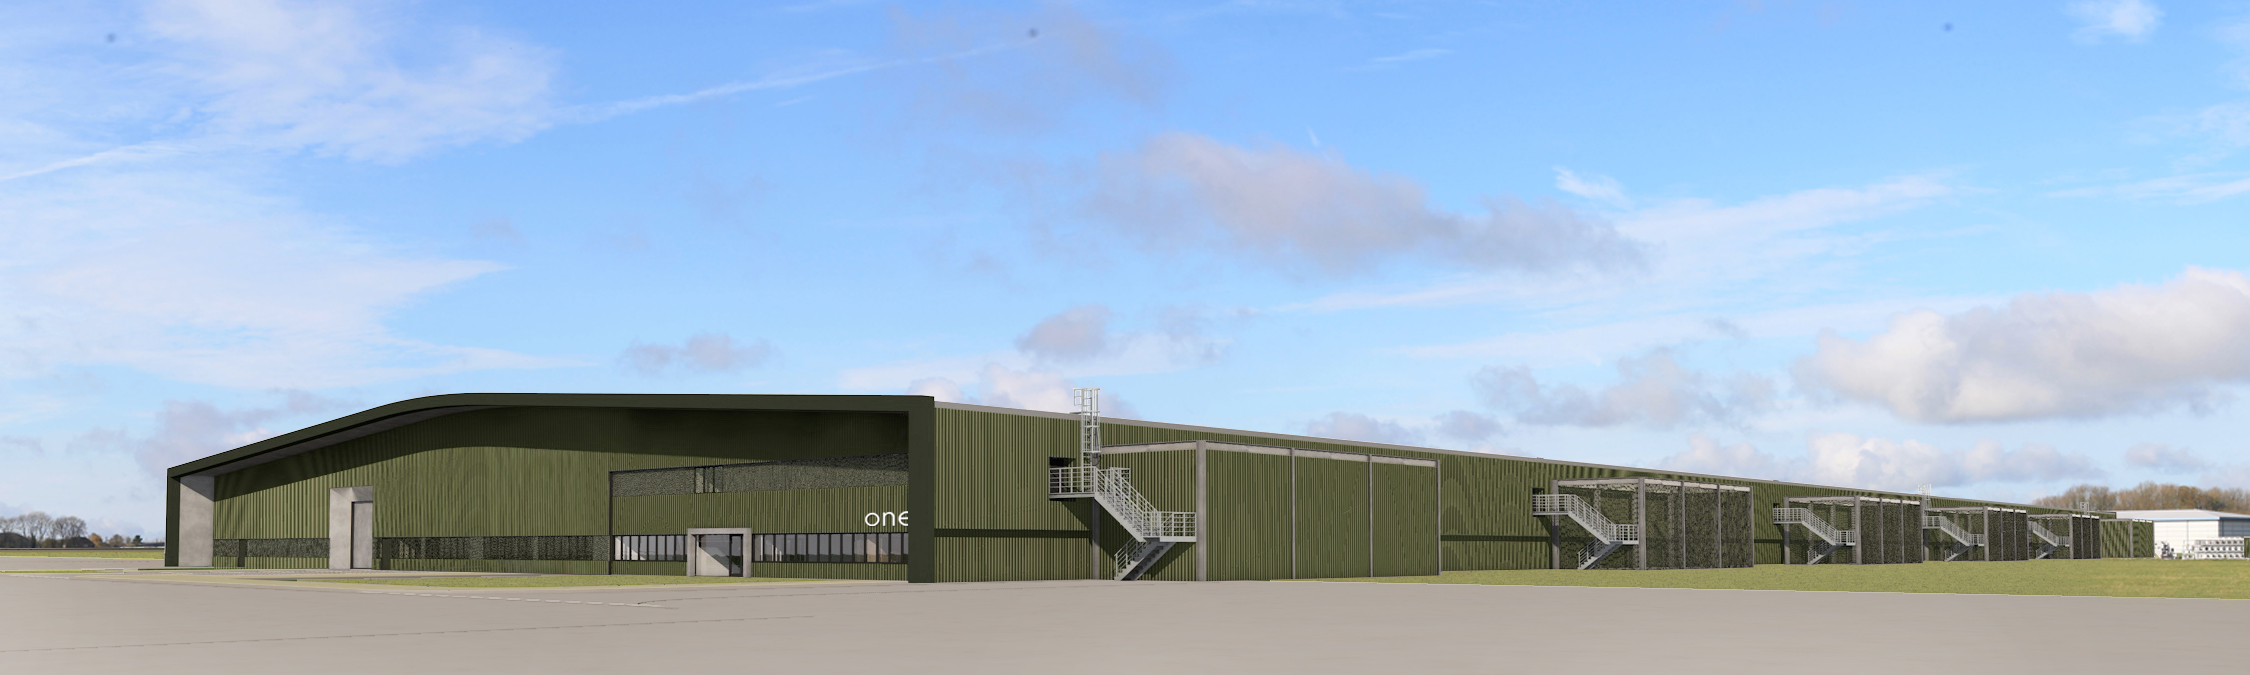 Architect's impression of the new collections management facility at the National Collections Centre